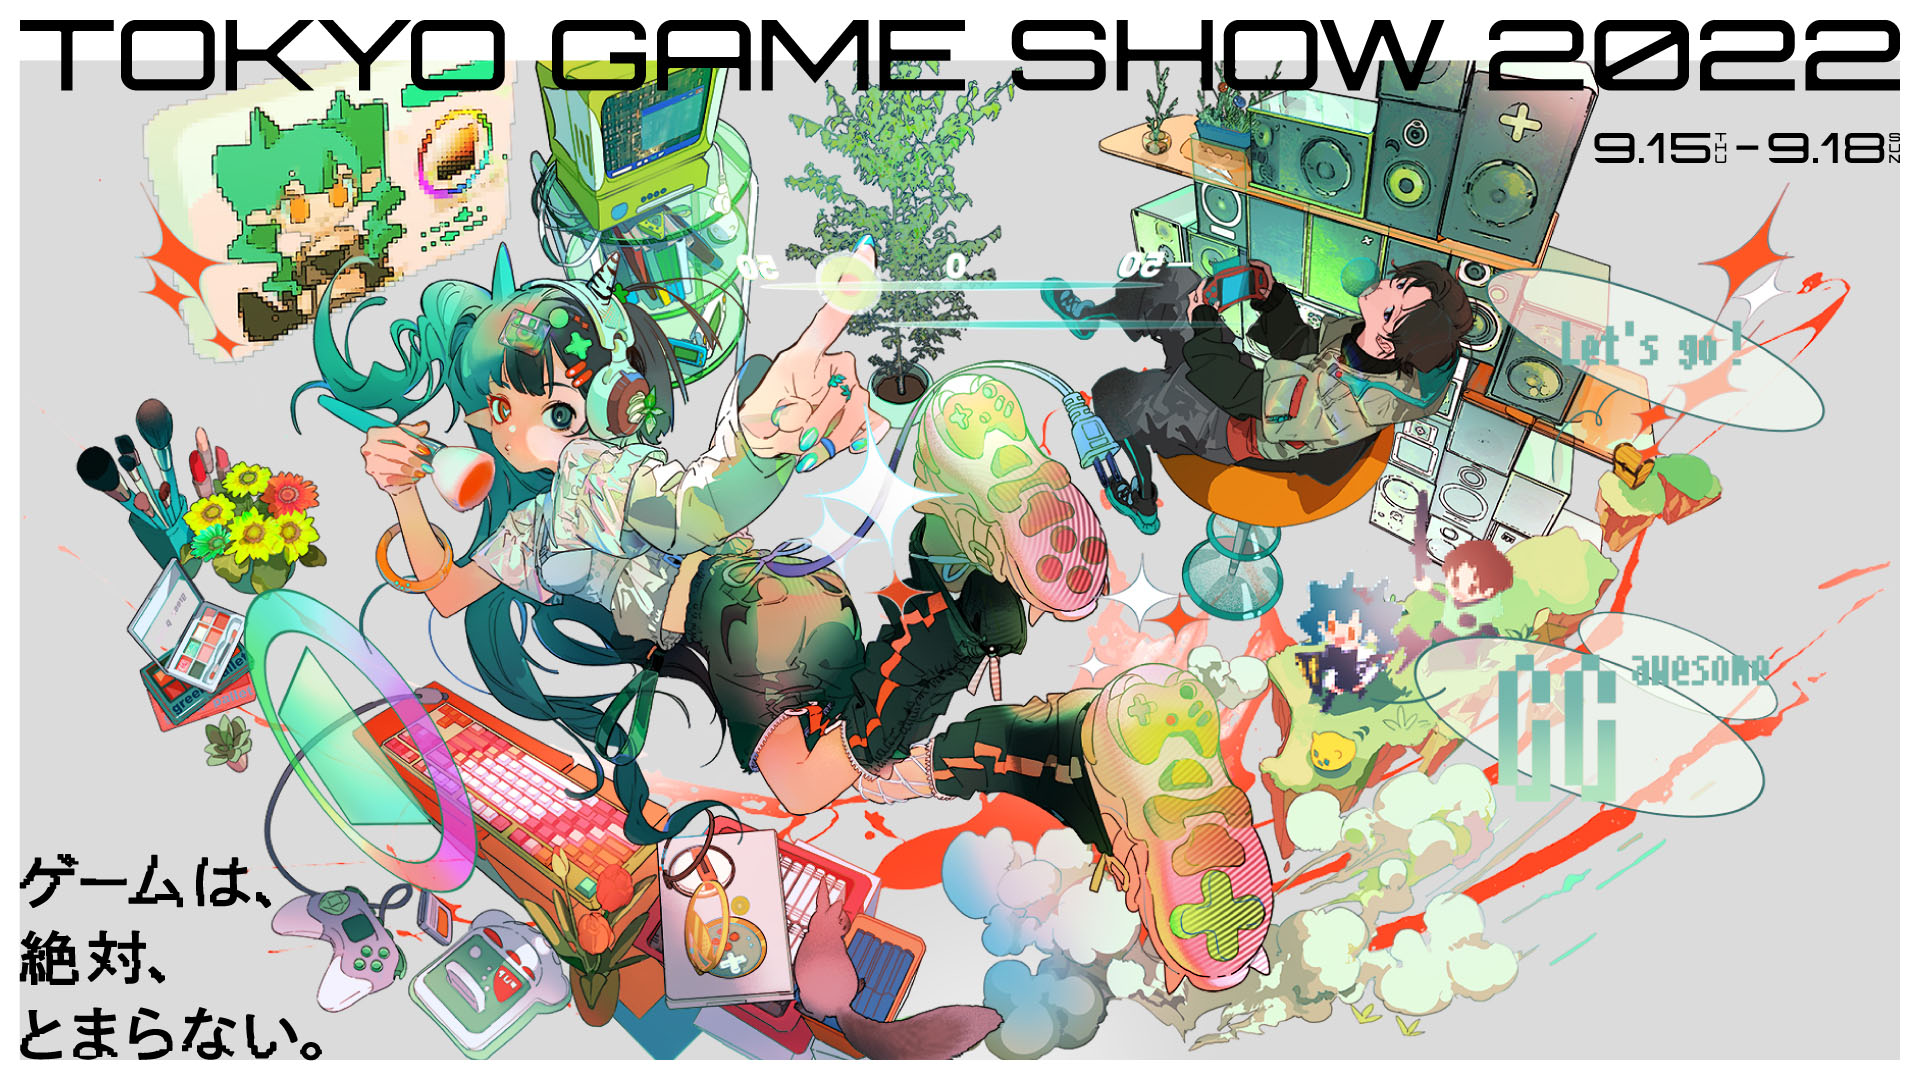 Tokyo GameShow 2022 with the theme "Nothing stops gaming"